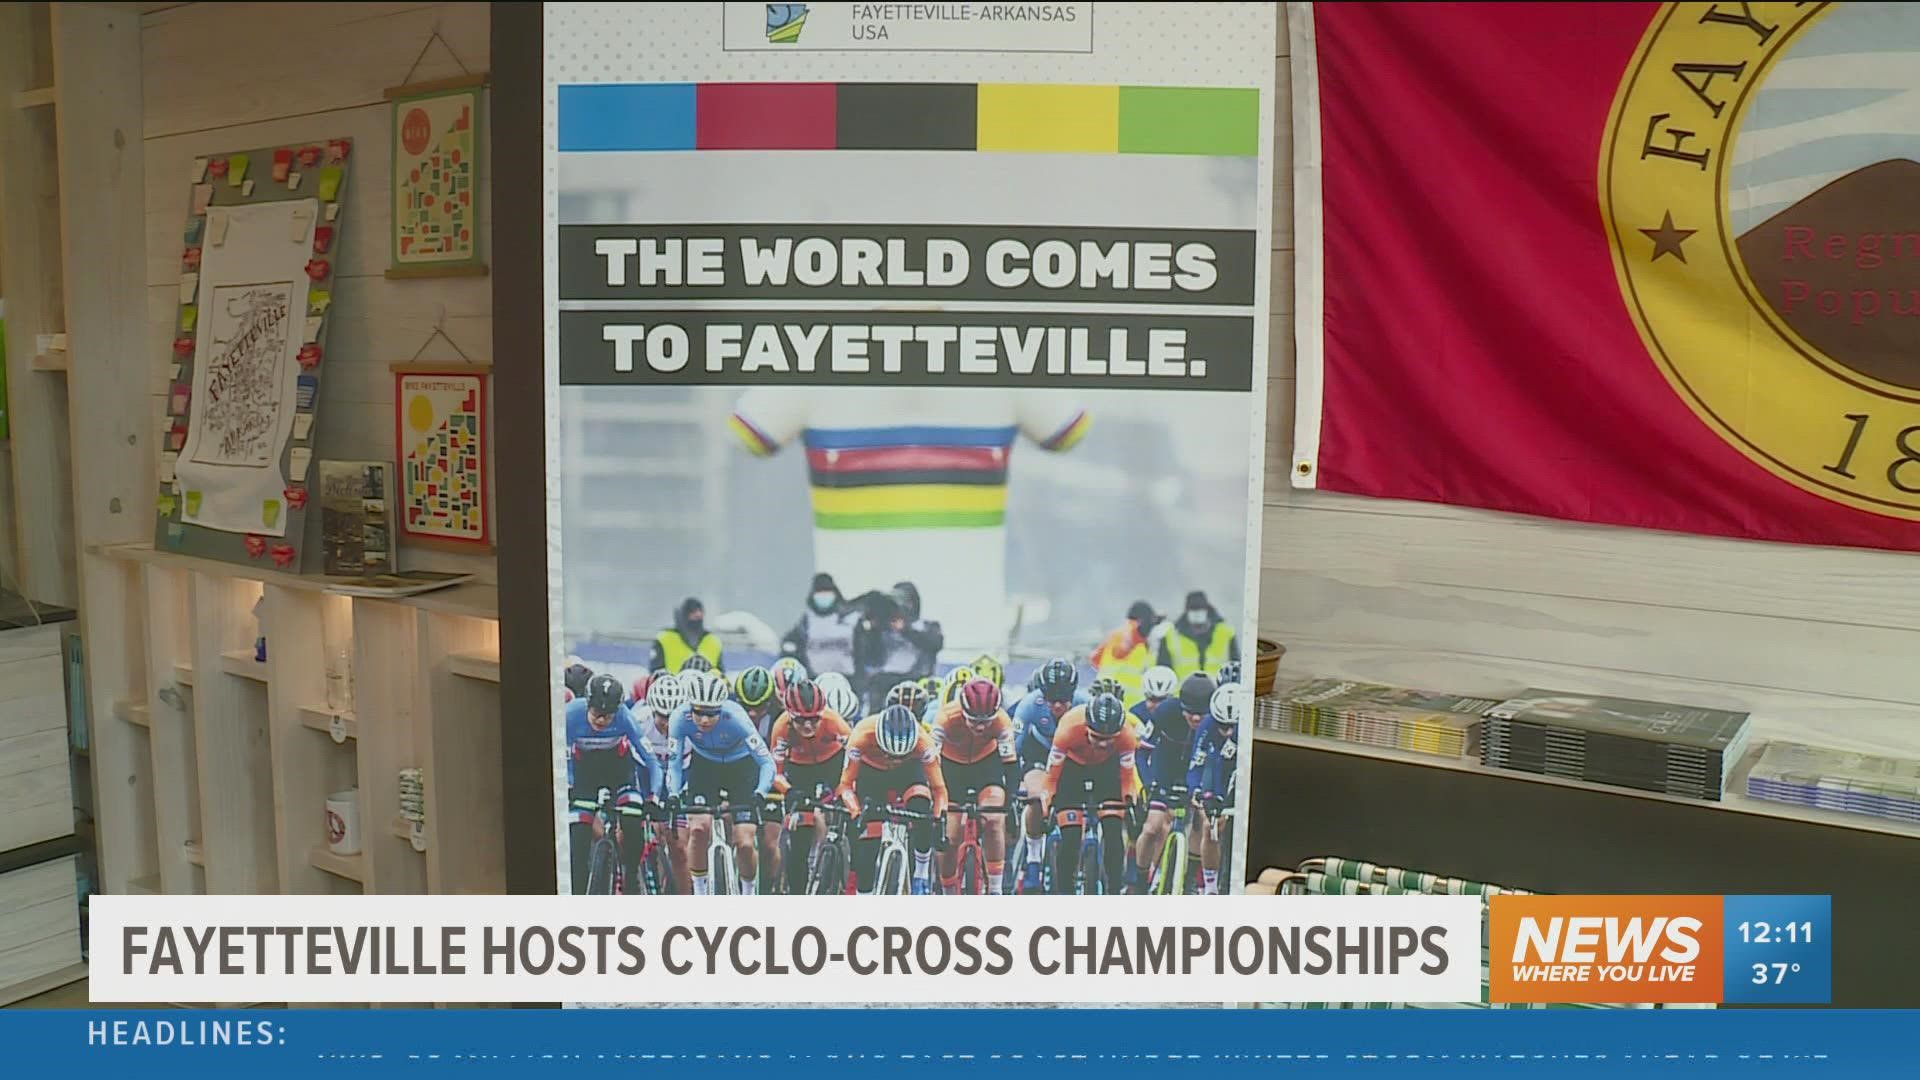 Around 300 athletes, thousands of spectators and media outlets are in Fayetteville for the 2022 Cyclo-Cross World Championship.